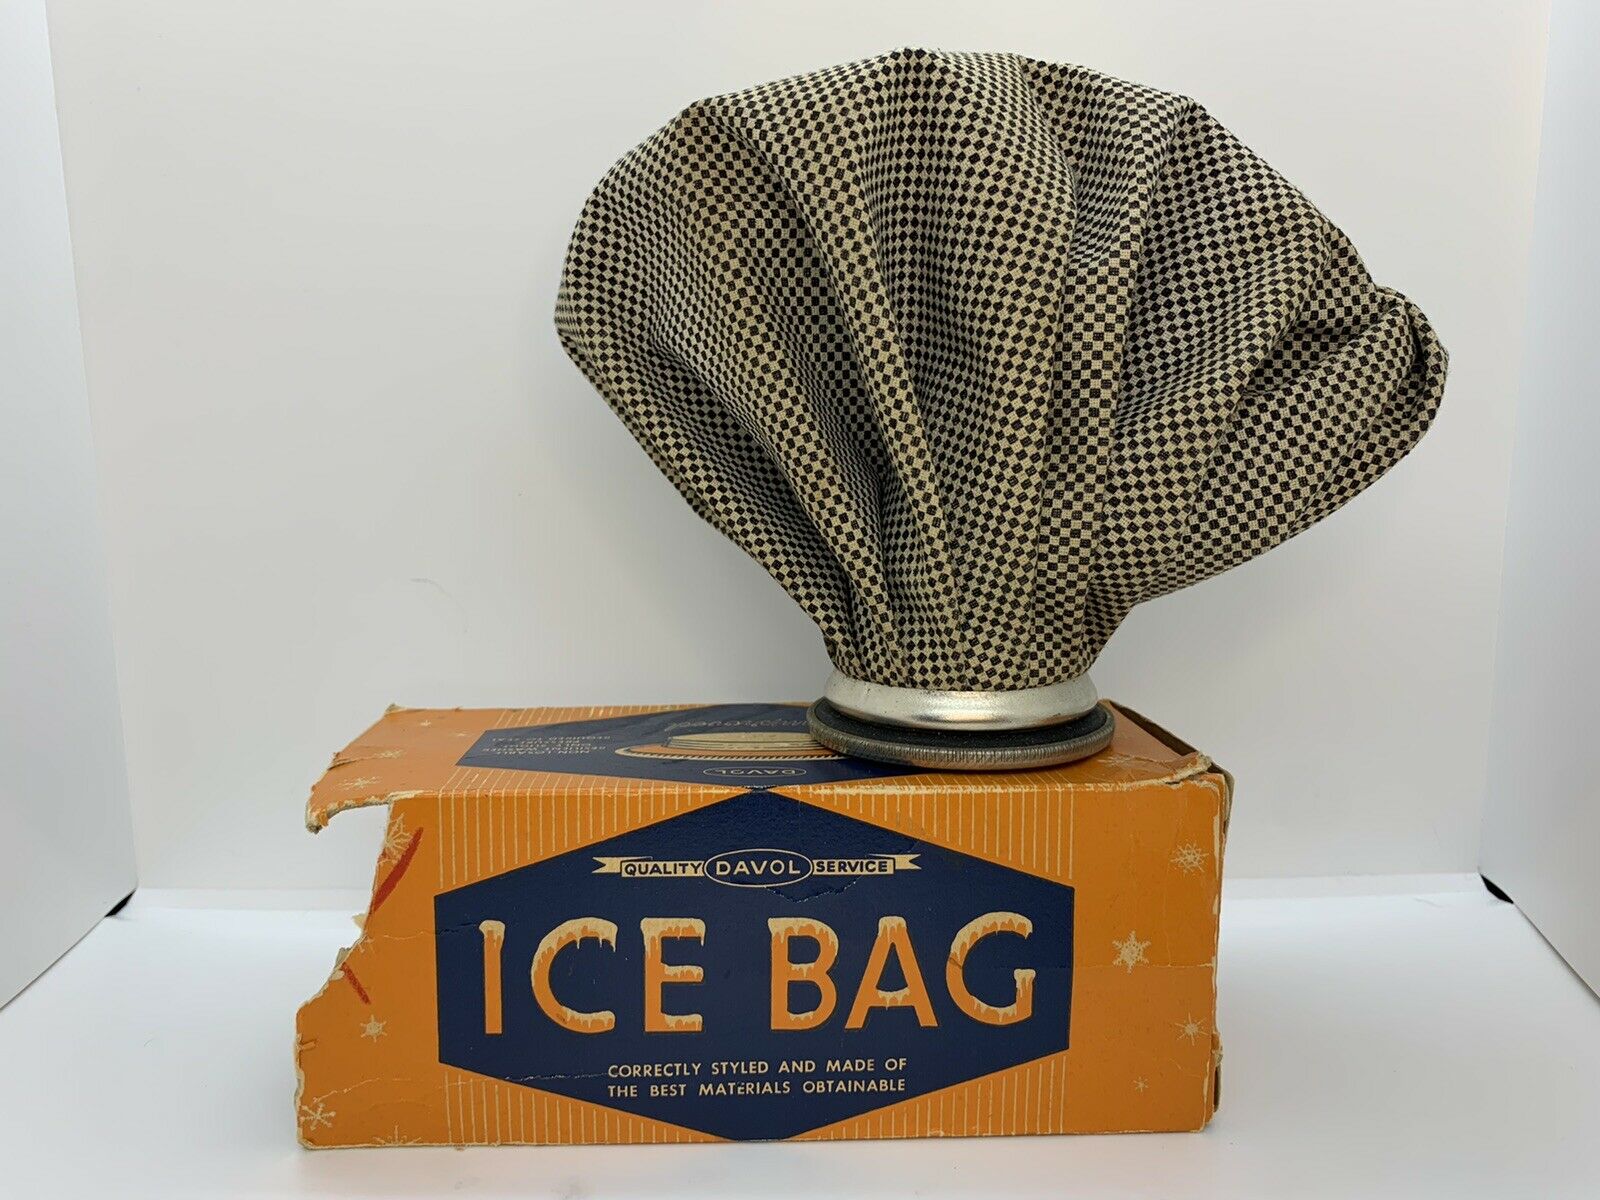 Davol Rubber Compant Ice Bag - One Turn Seal - Vintage Made In Usa Original Box